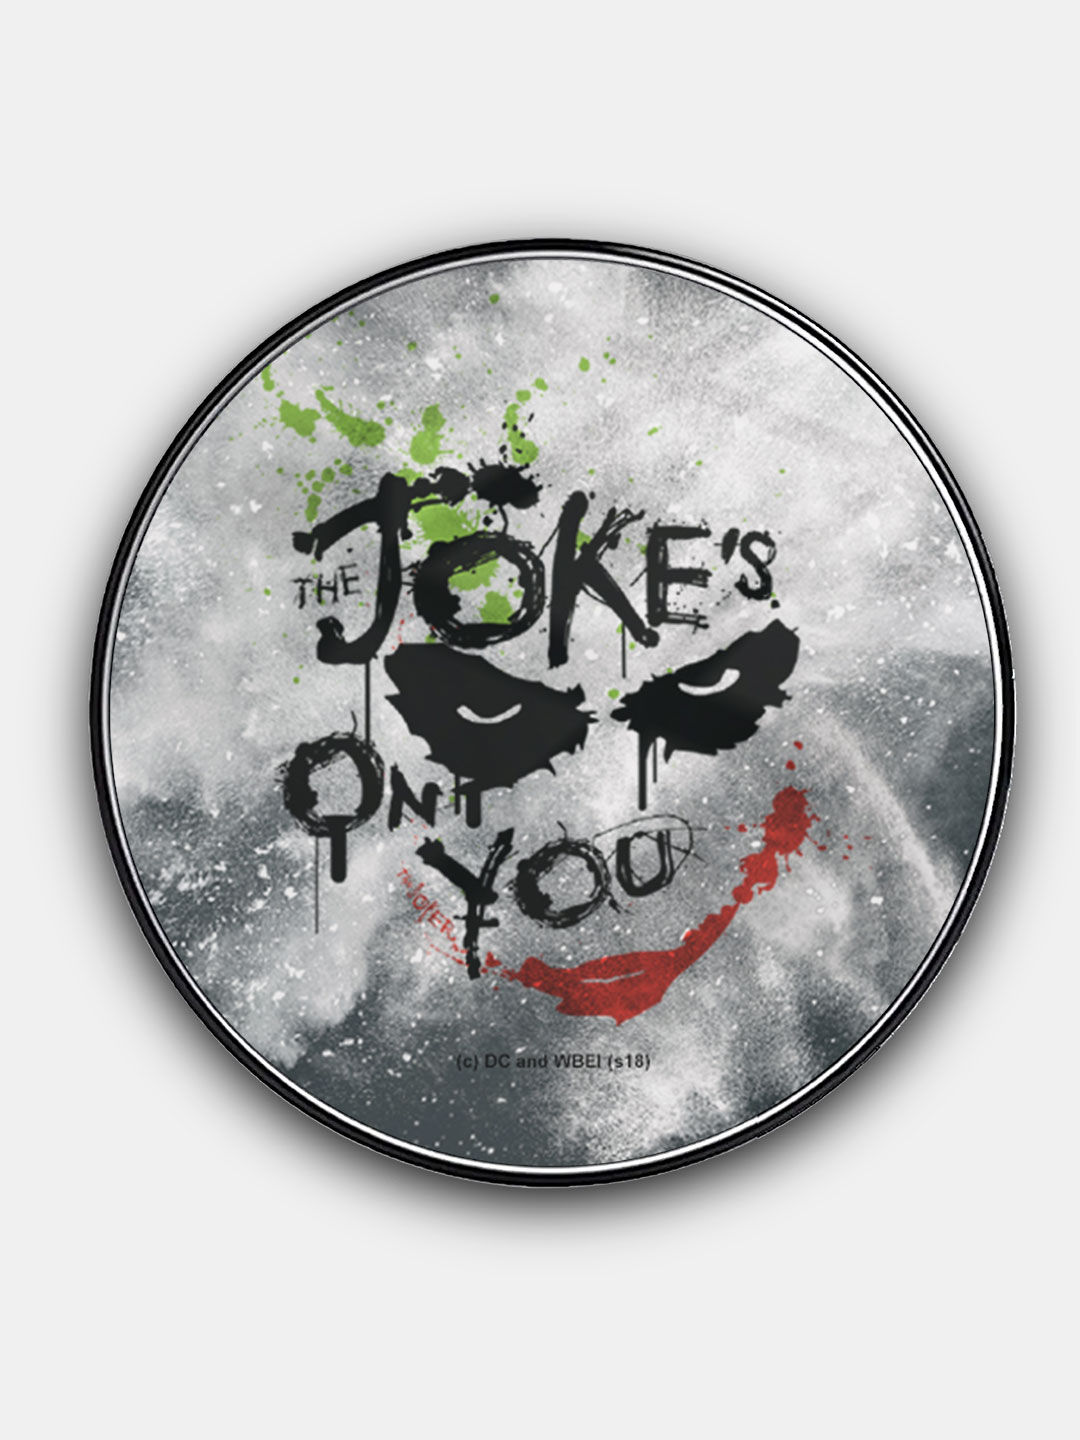 Buy The Jokes on you - Qi Compatible Pro Wireless Charger Wireless Chargers Online